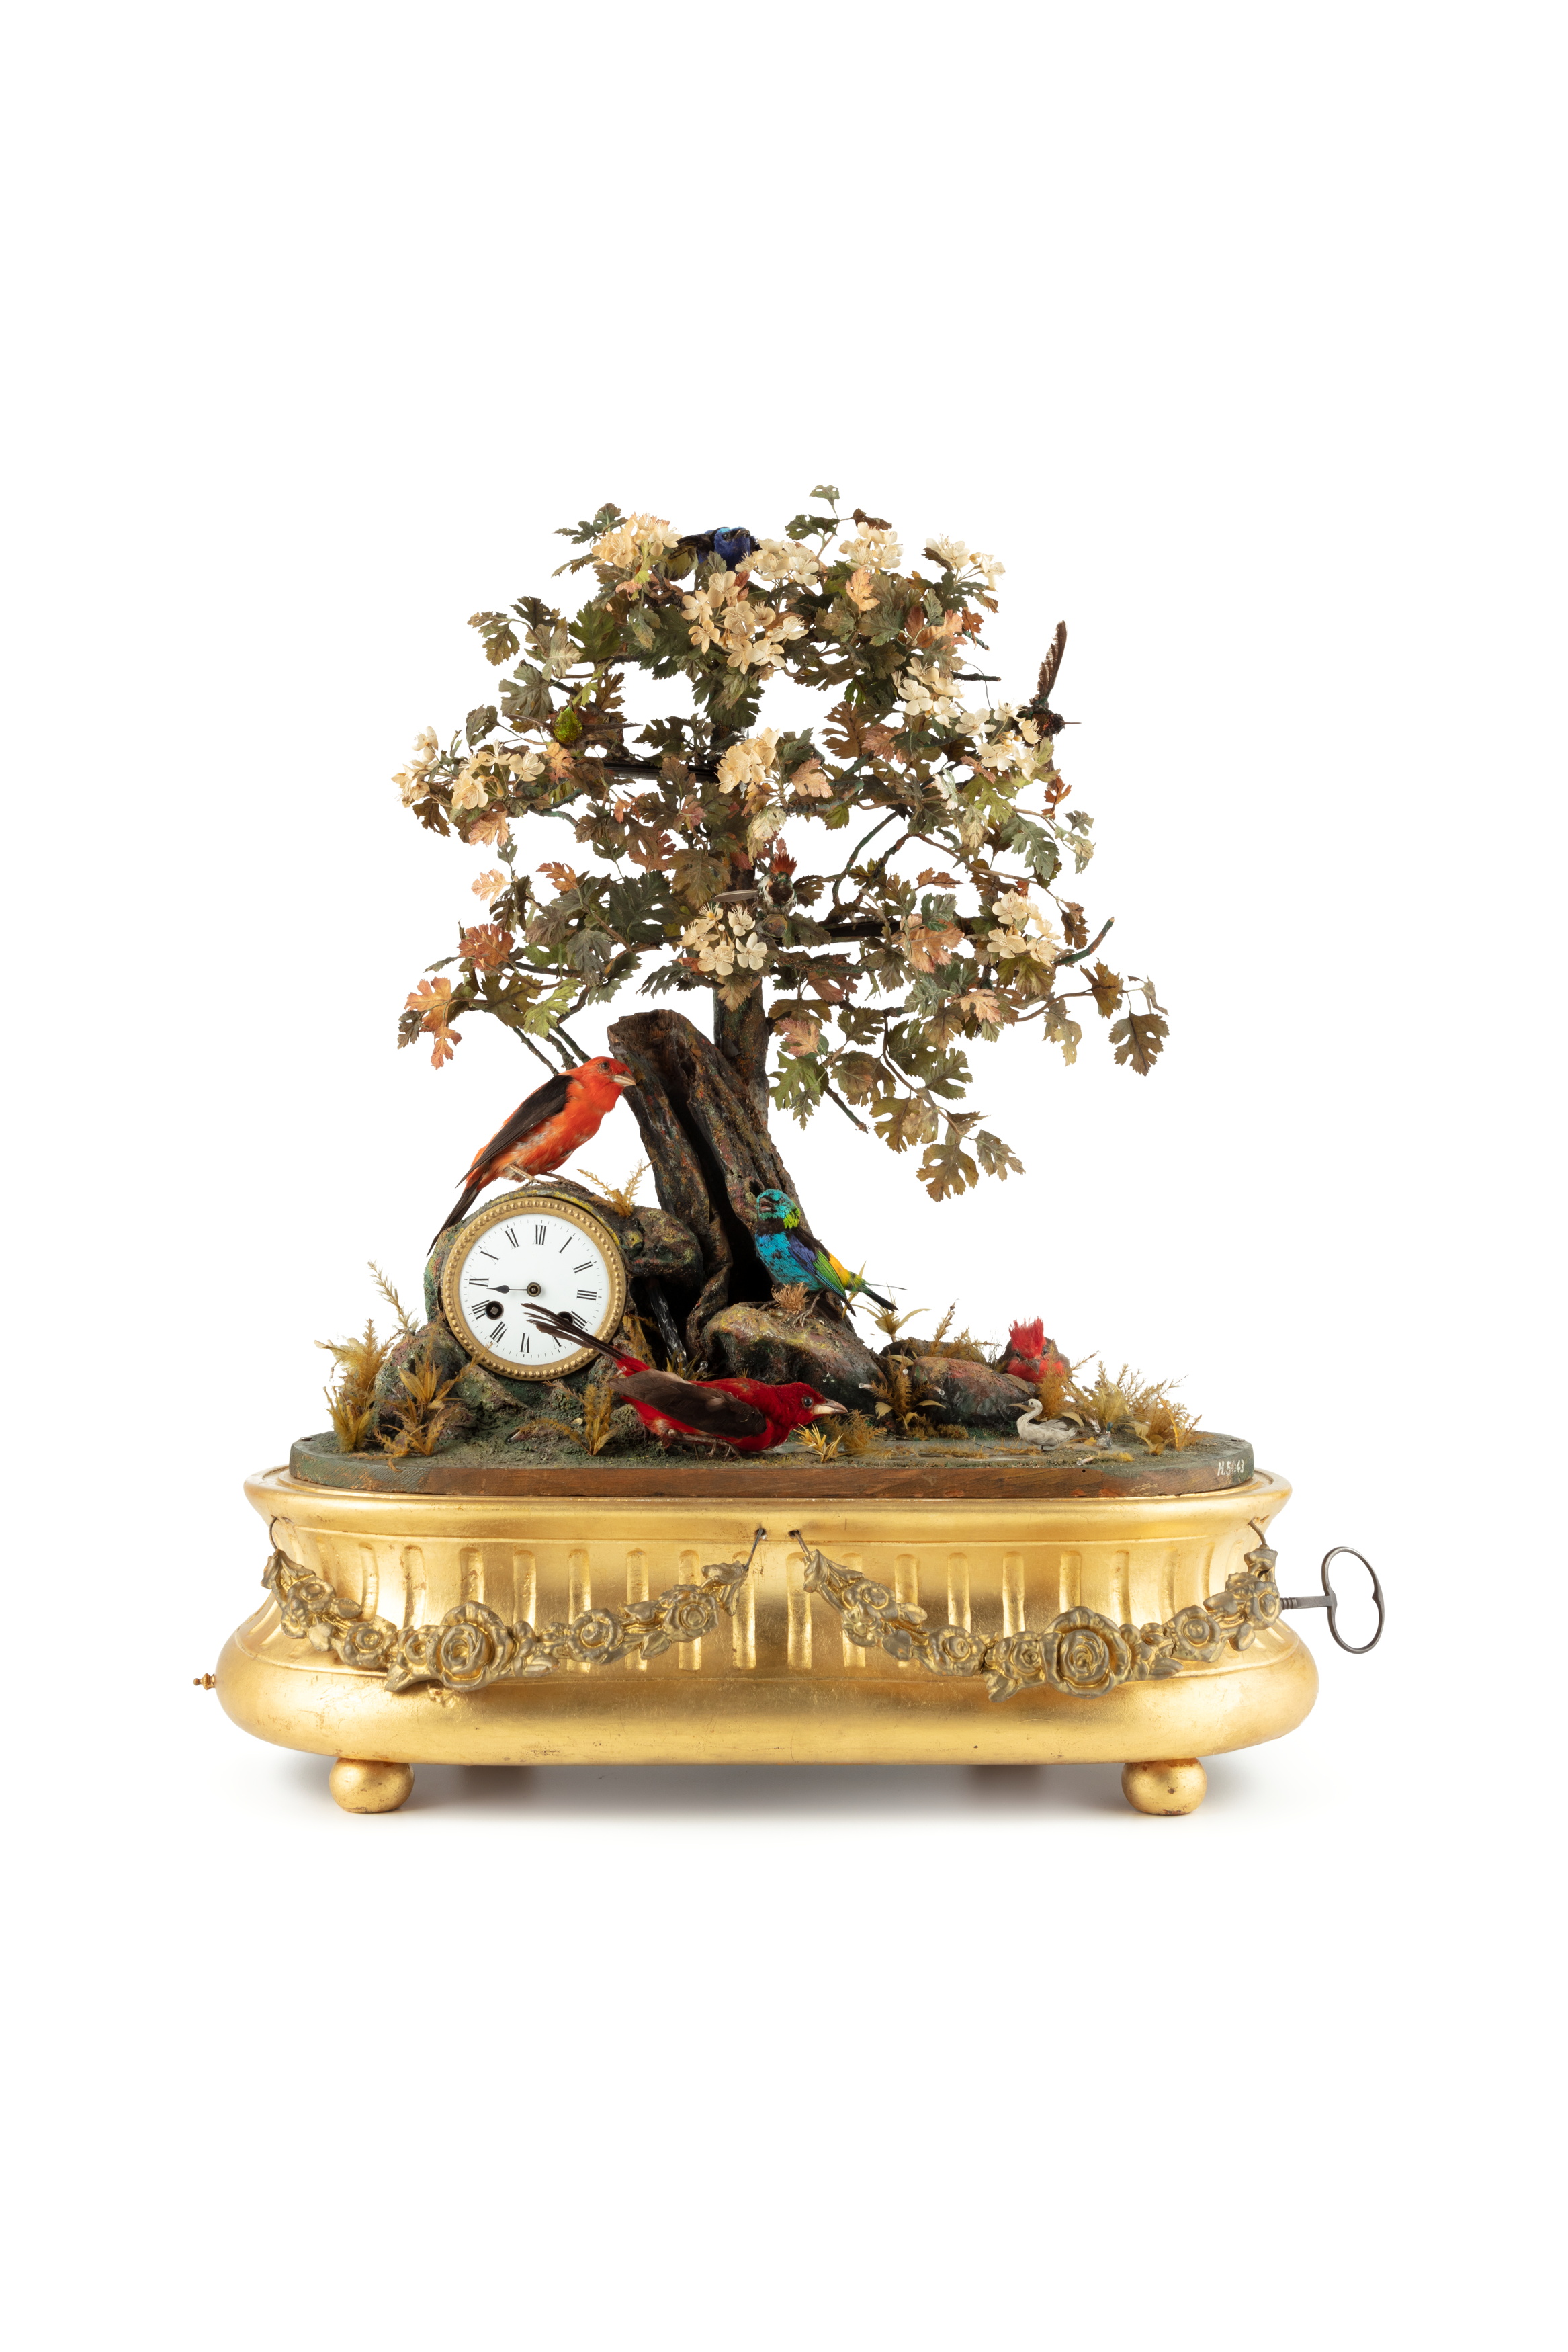 French musical automaton by Bontems family